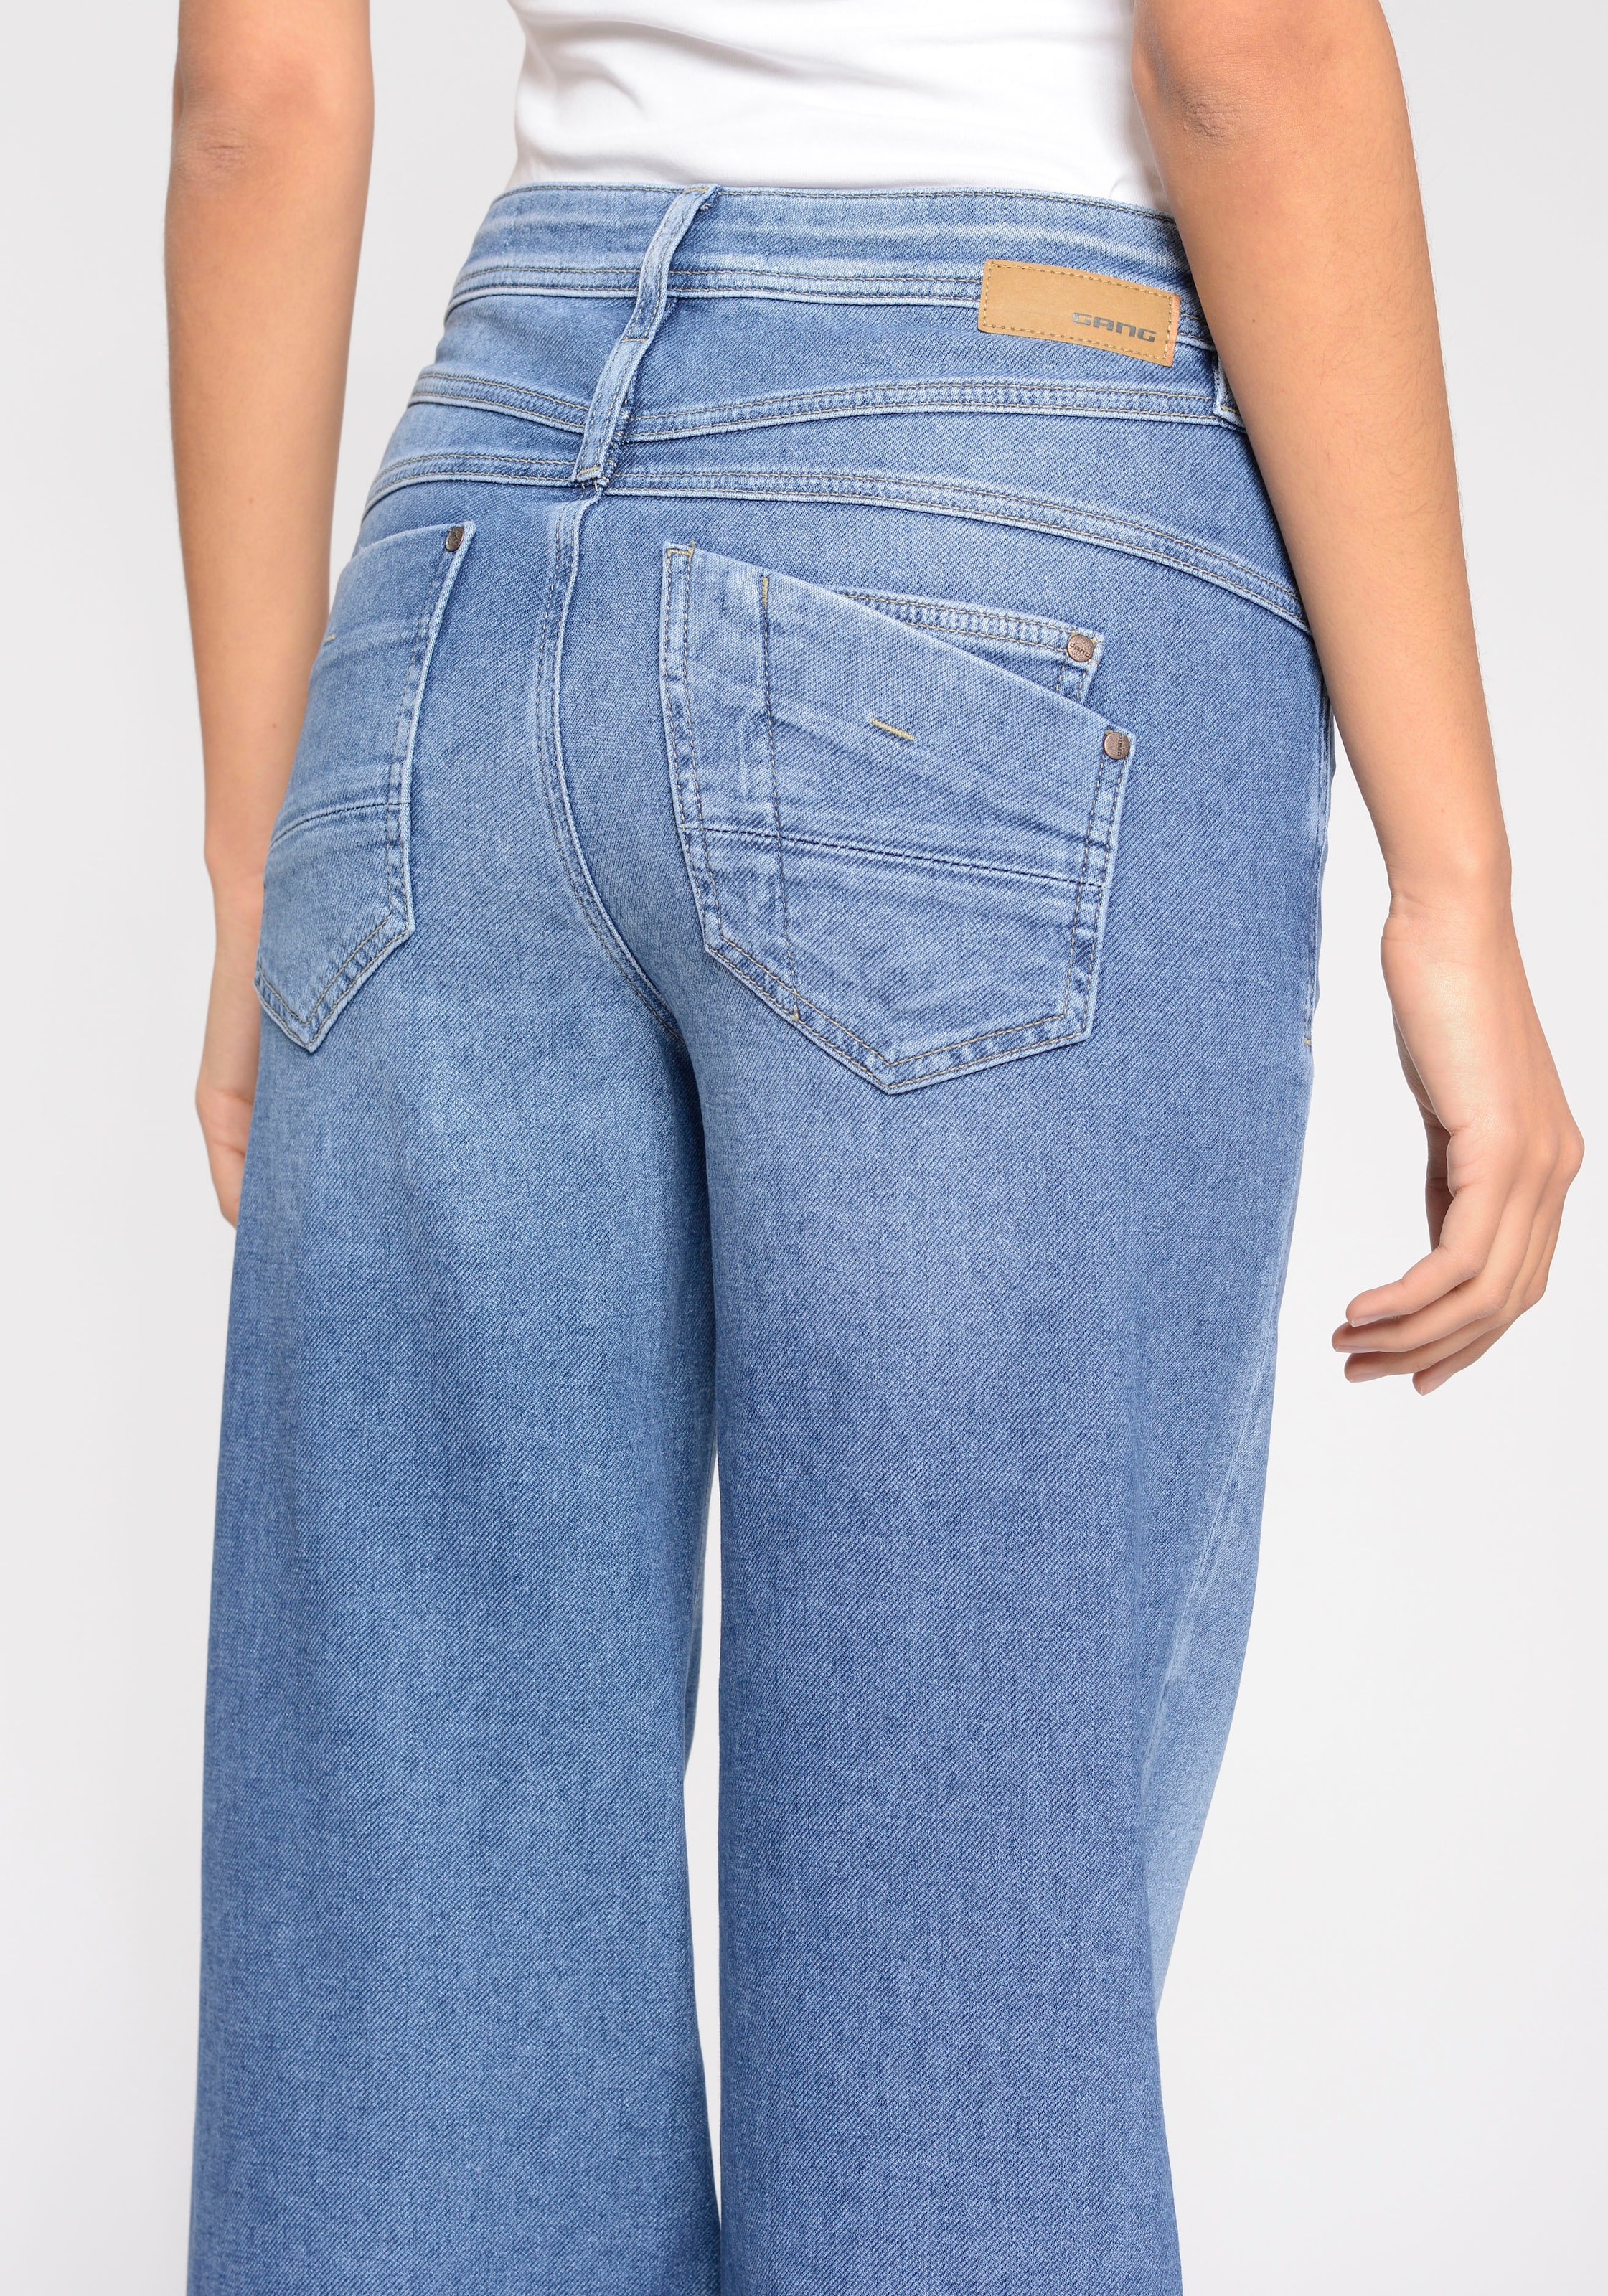 »94Amelie Weite GANG Jeans bei Wide« ♕